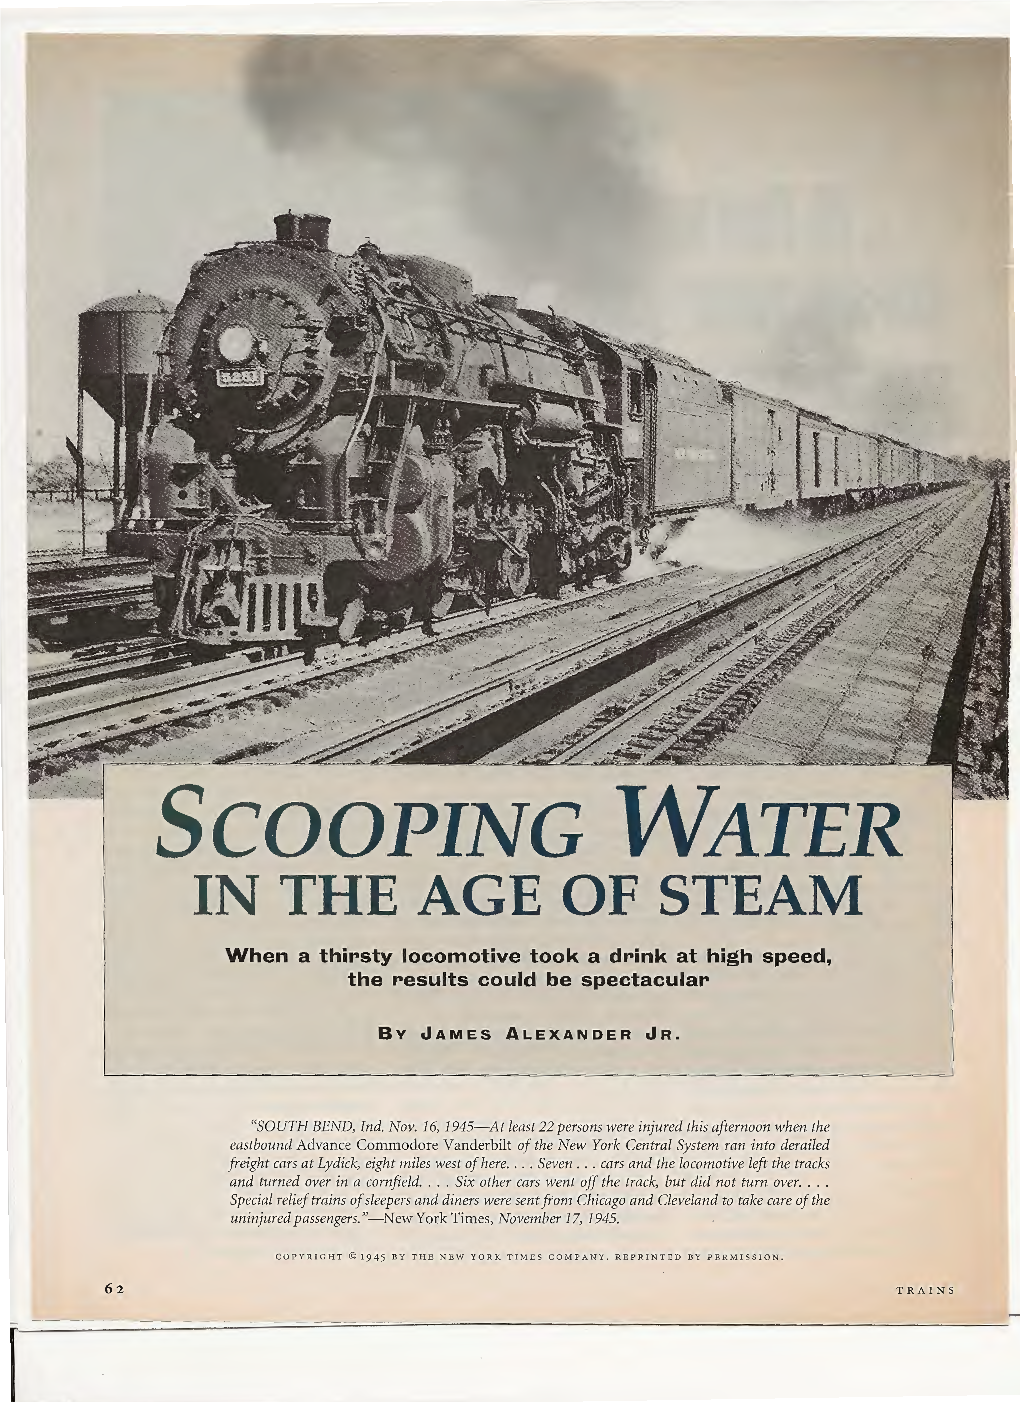 Scooping Water in the Age of Steam